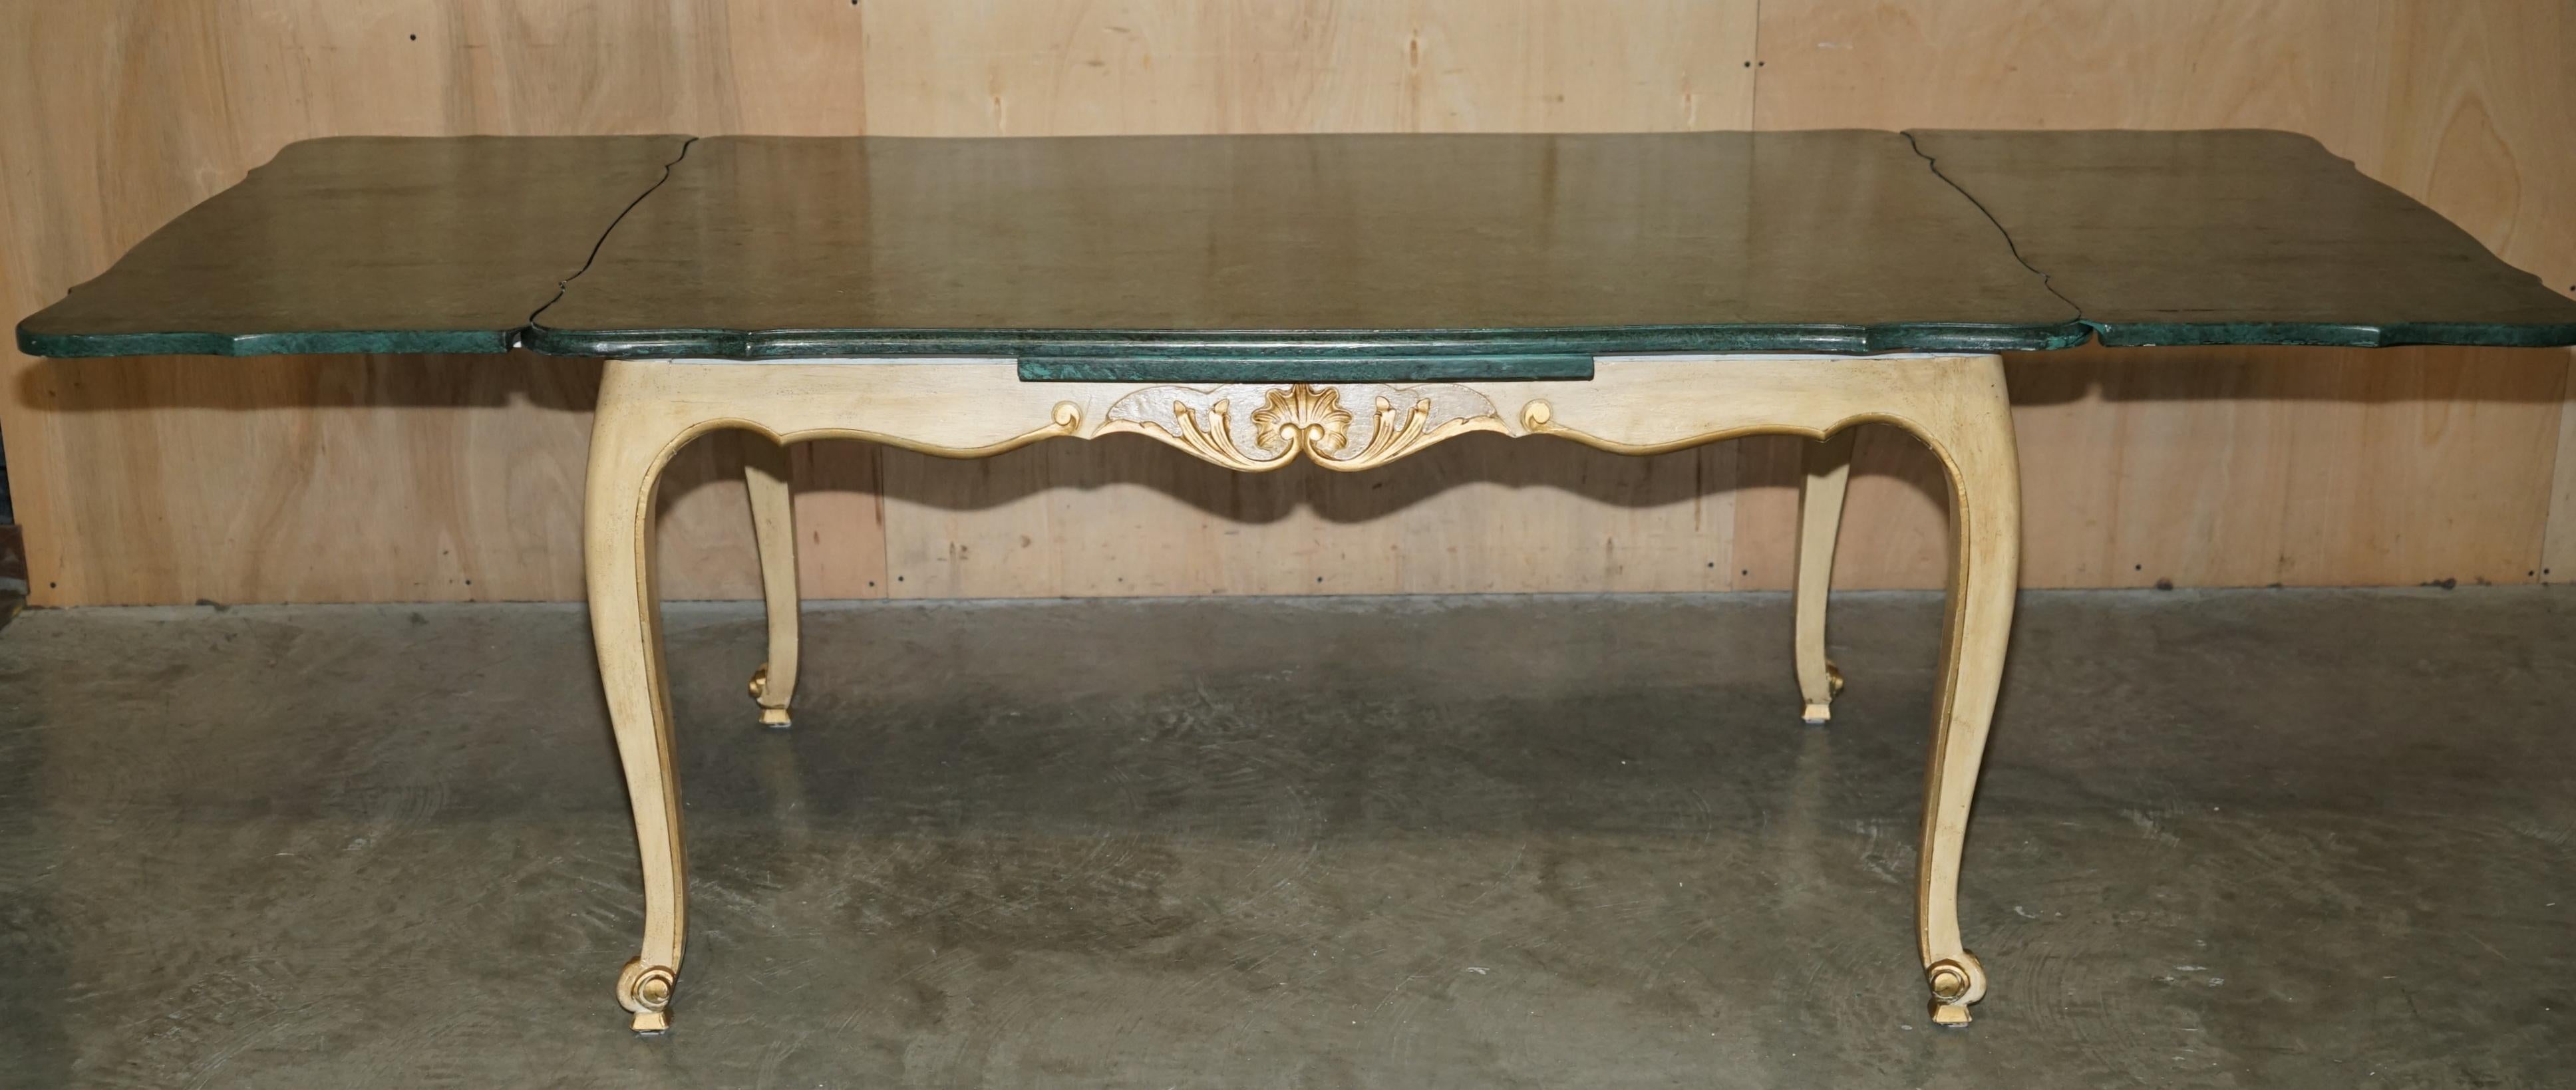 SUBLIME ANTIQUE FRENCH 1870 EXTENDING DiNING TABLE FAUX PAINTED MALACHITE TOP For Sale 5